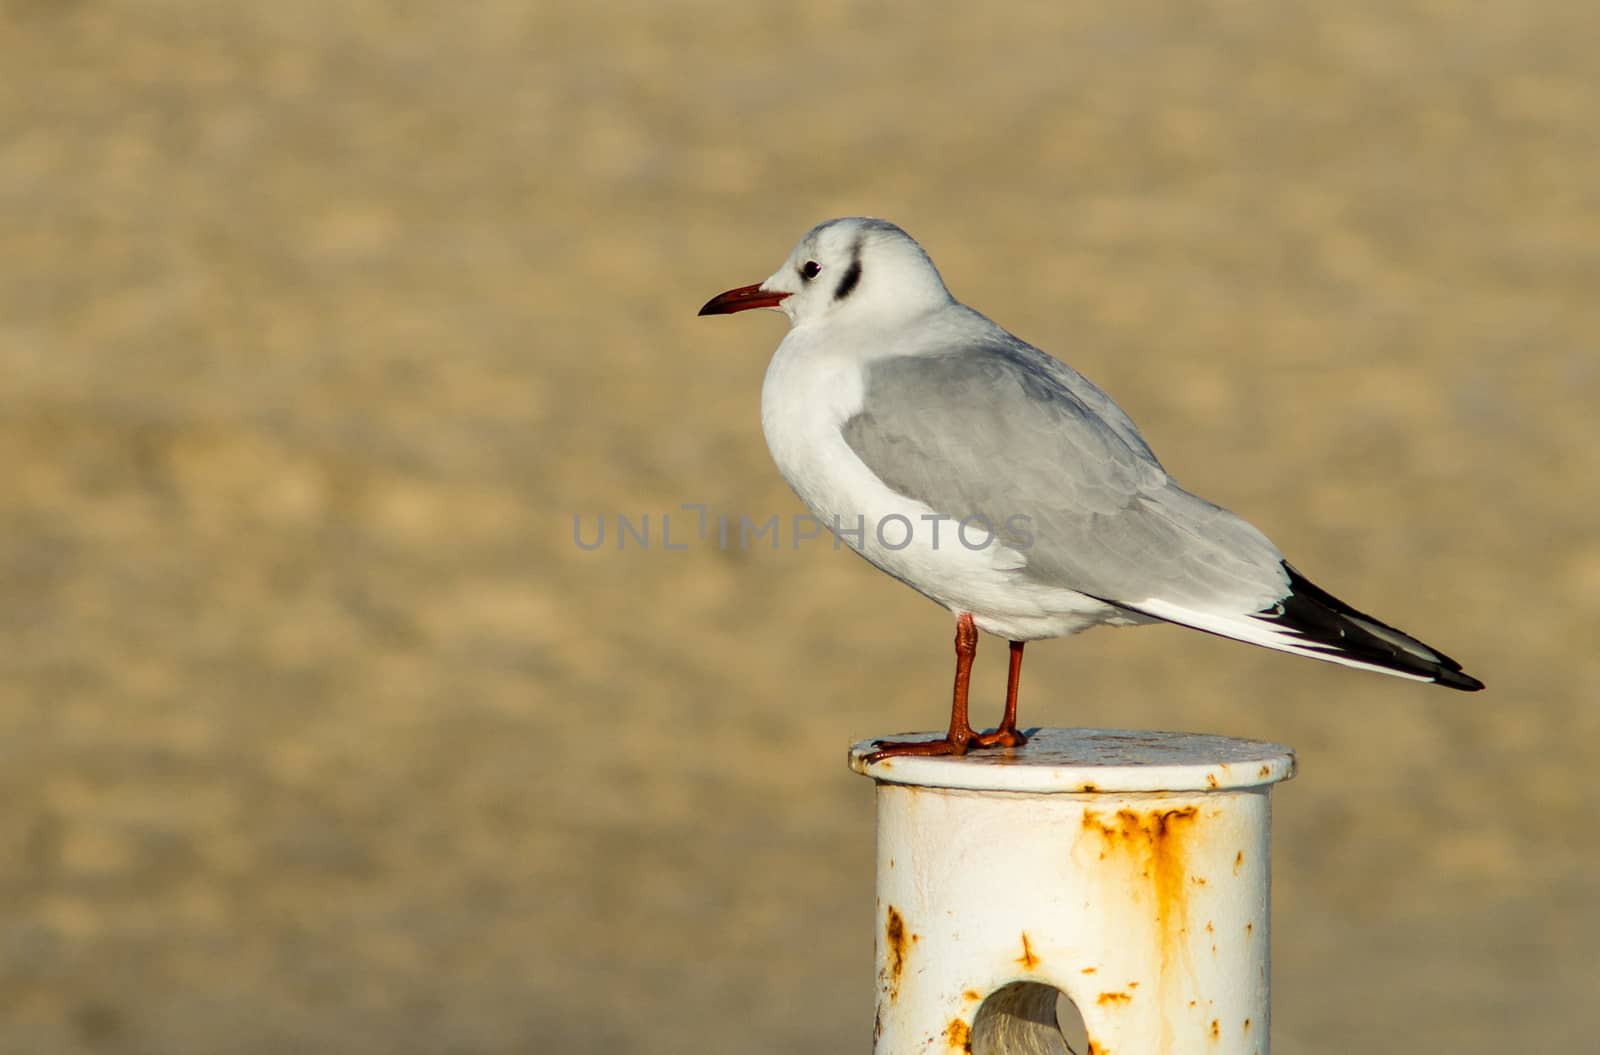 Seagull on a Rusty Pole by Multipedia